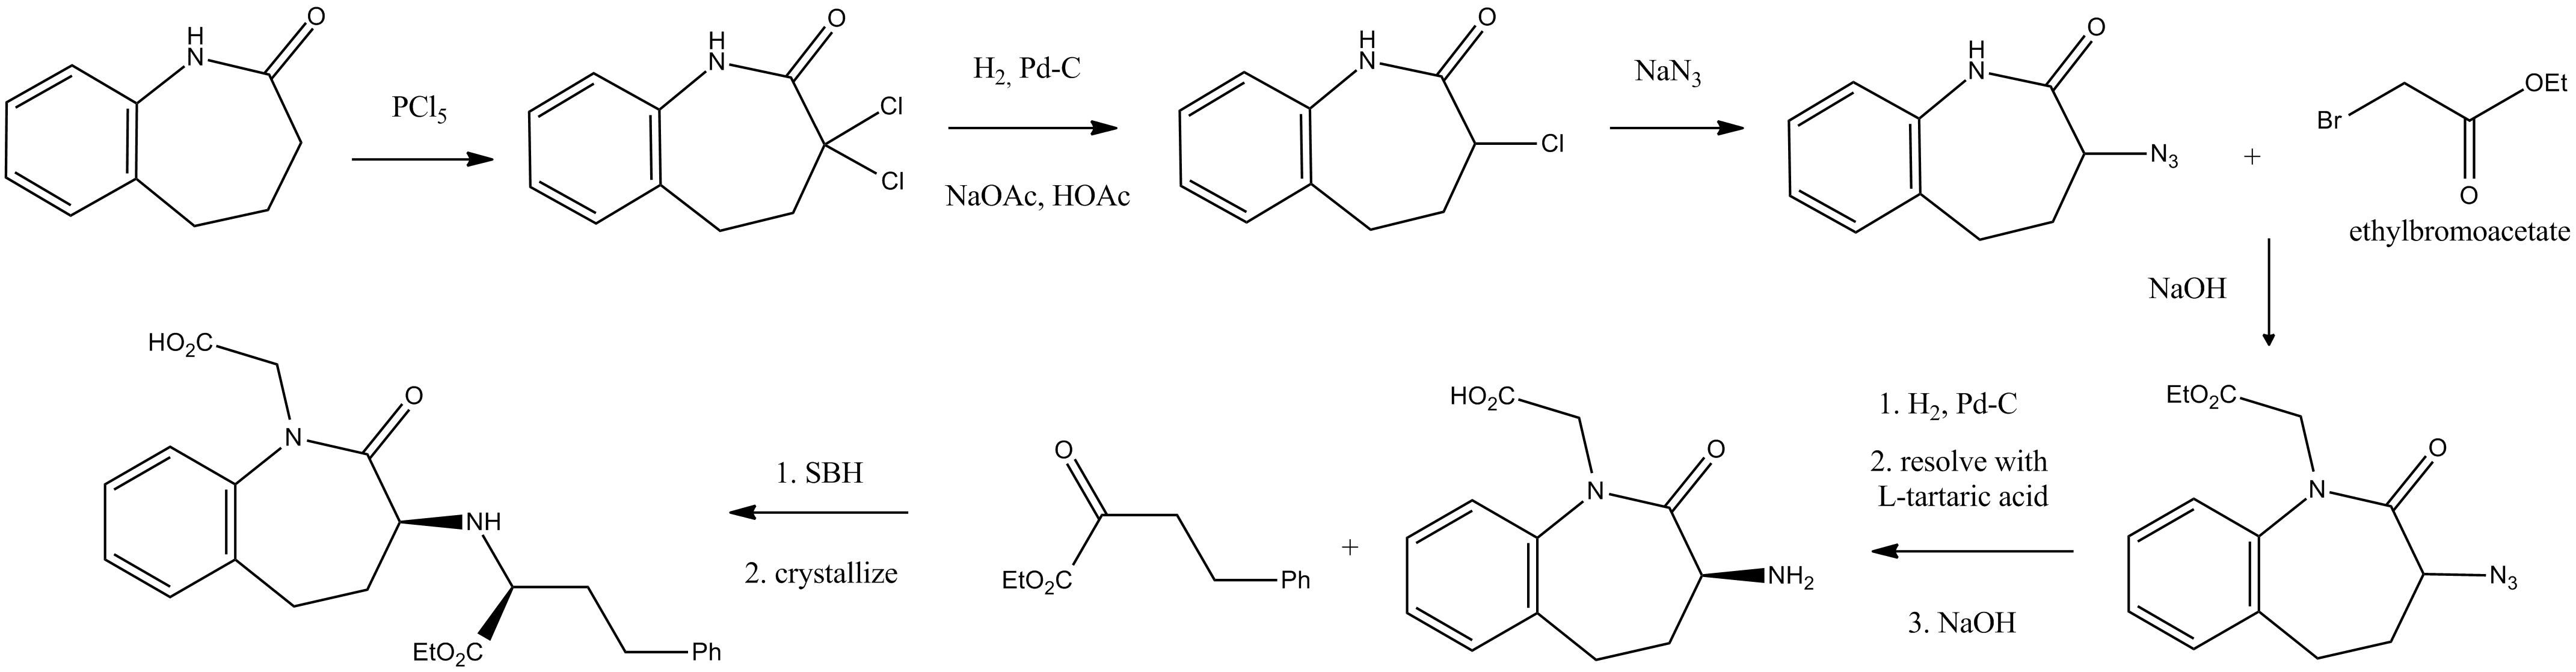 File:Avanafil synthesis.png